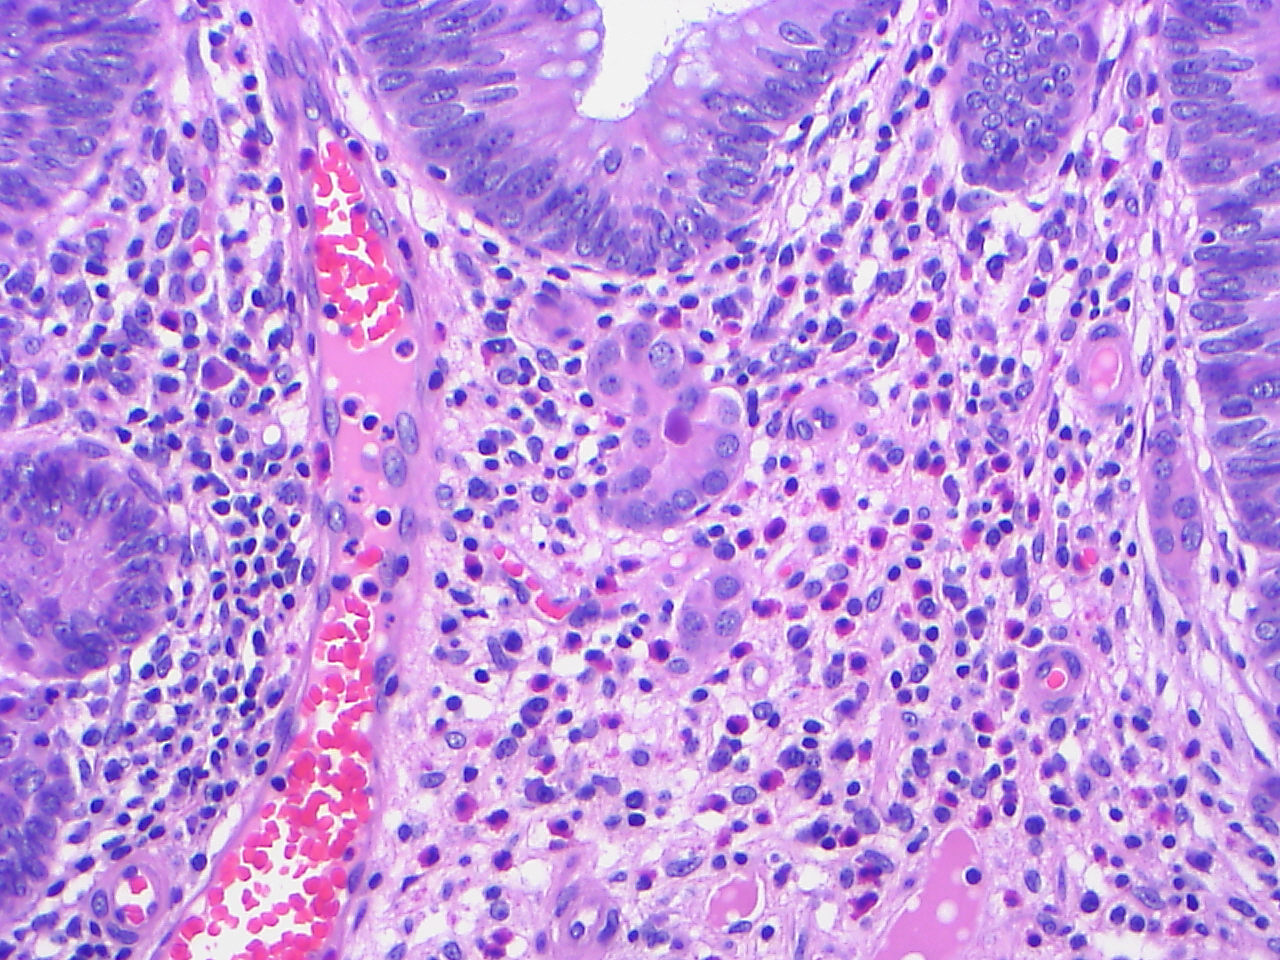 Colonic tubulovillous adenoma with microcarcinoids